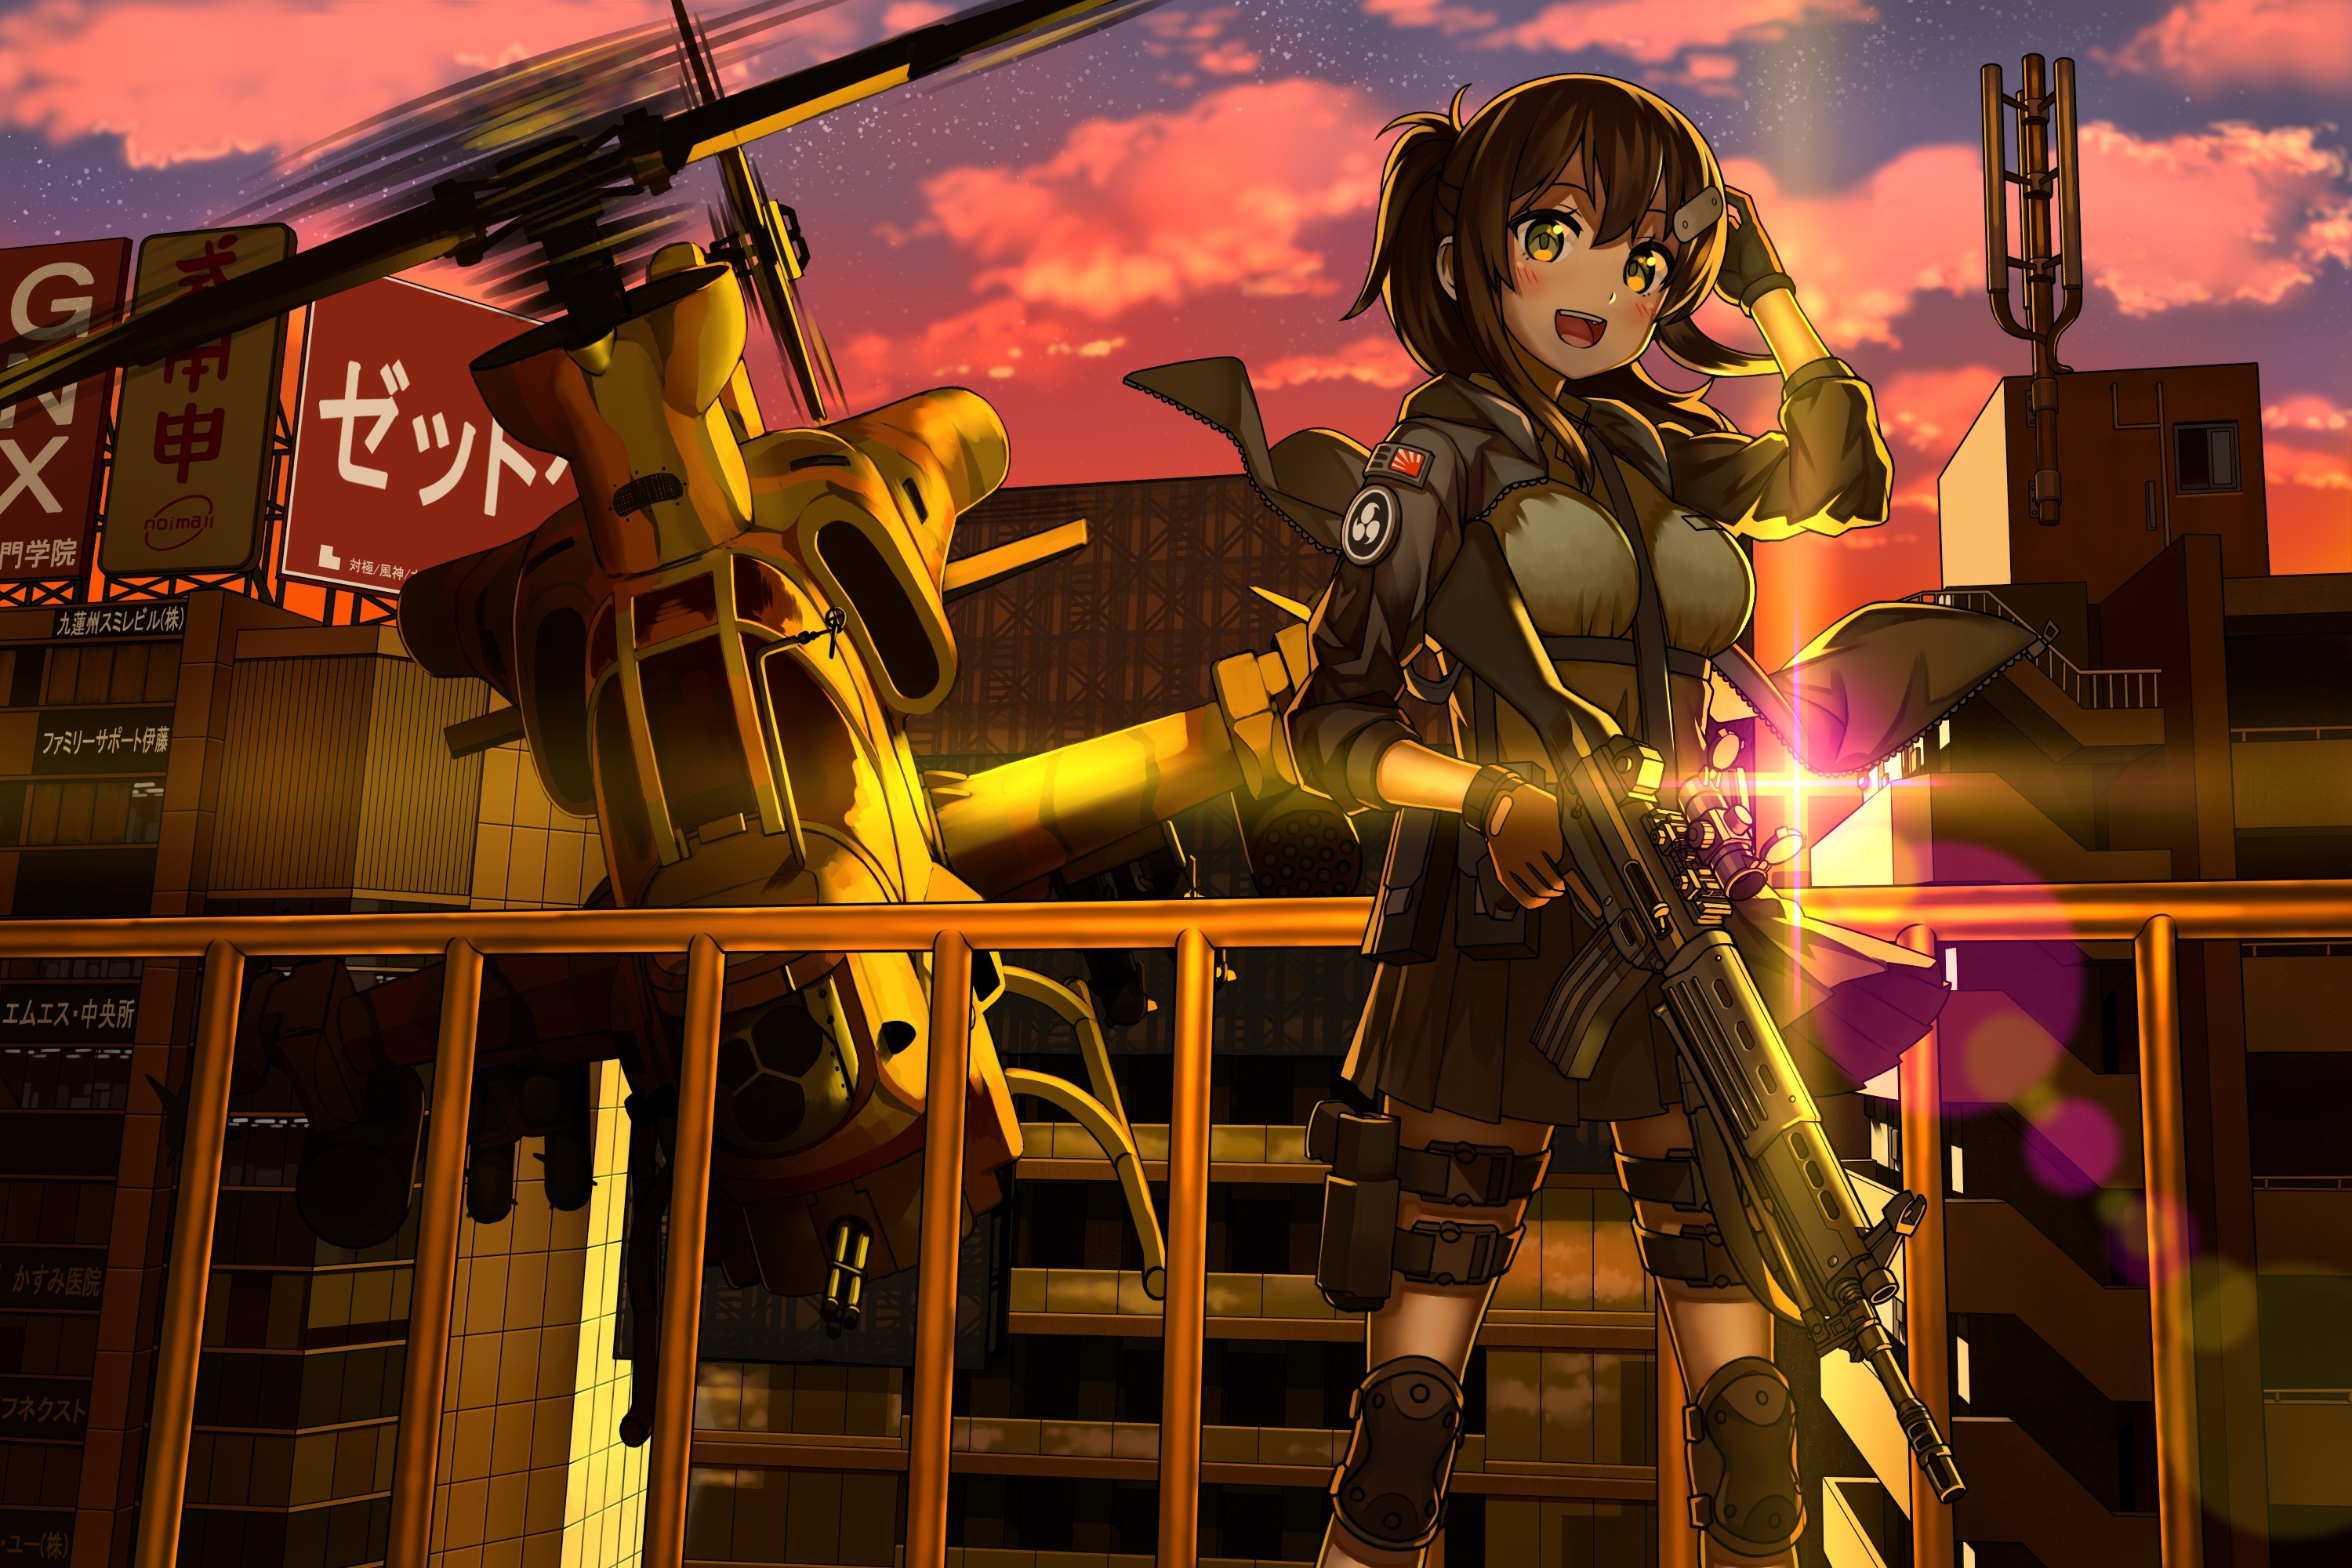 Anime 3000x2000 anime anime girls brunette sunset weapon long hair green eyes gun skirt Galil original characters girls with guns helicopters ponytail thighs black skirts